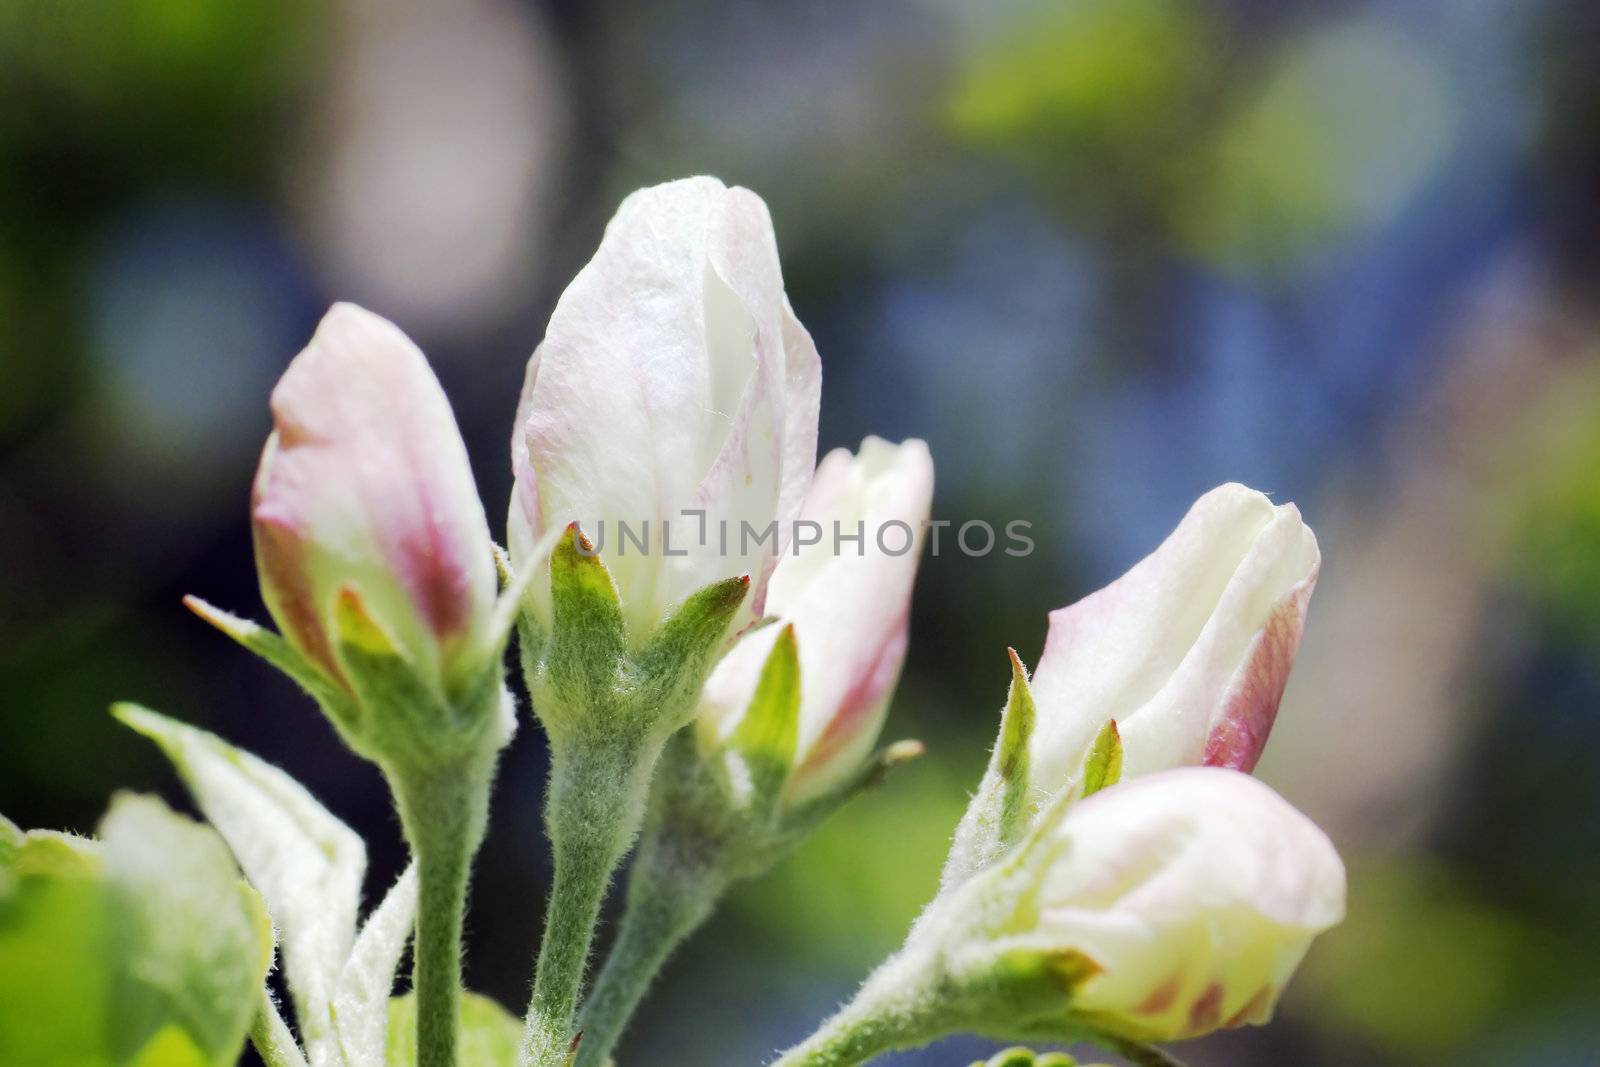 It's spring: apple tree white and pink flower buds just about to bloom in a beautiful daylight.